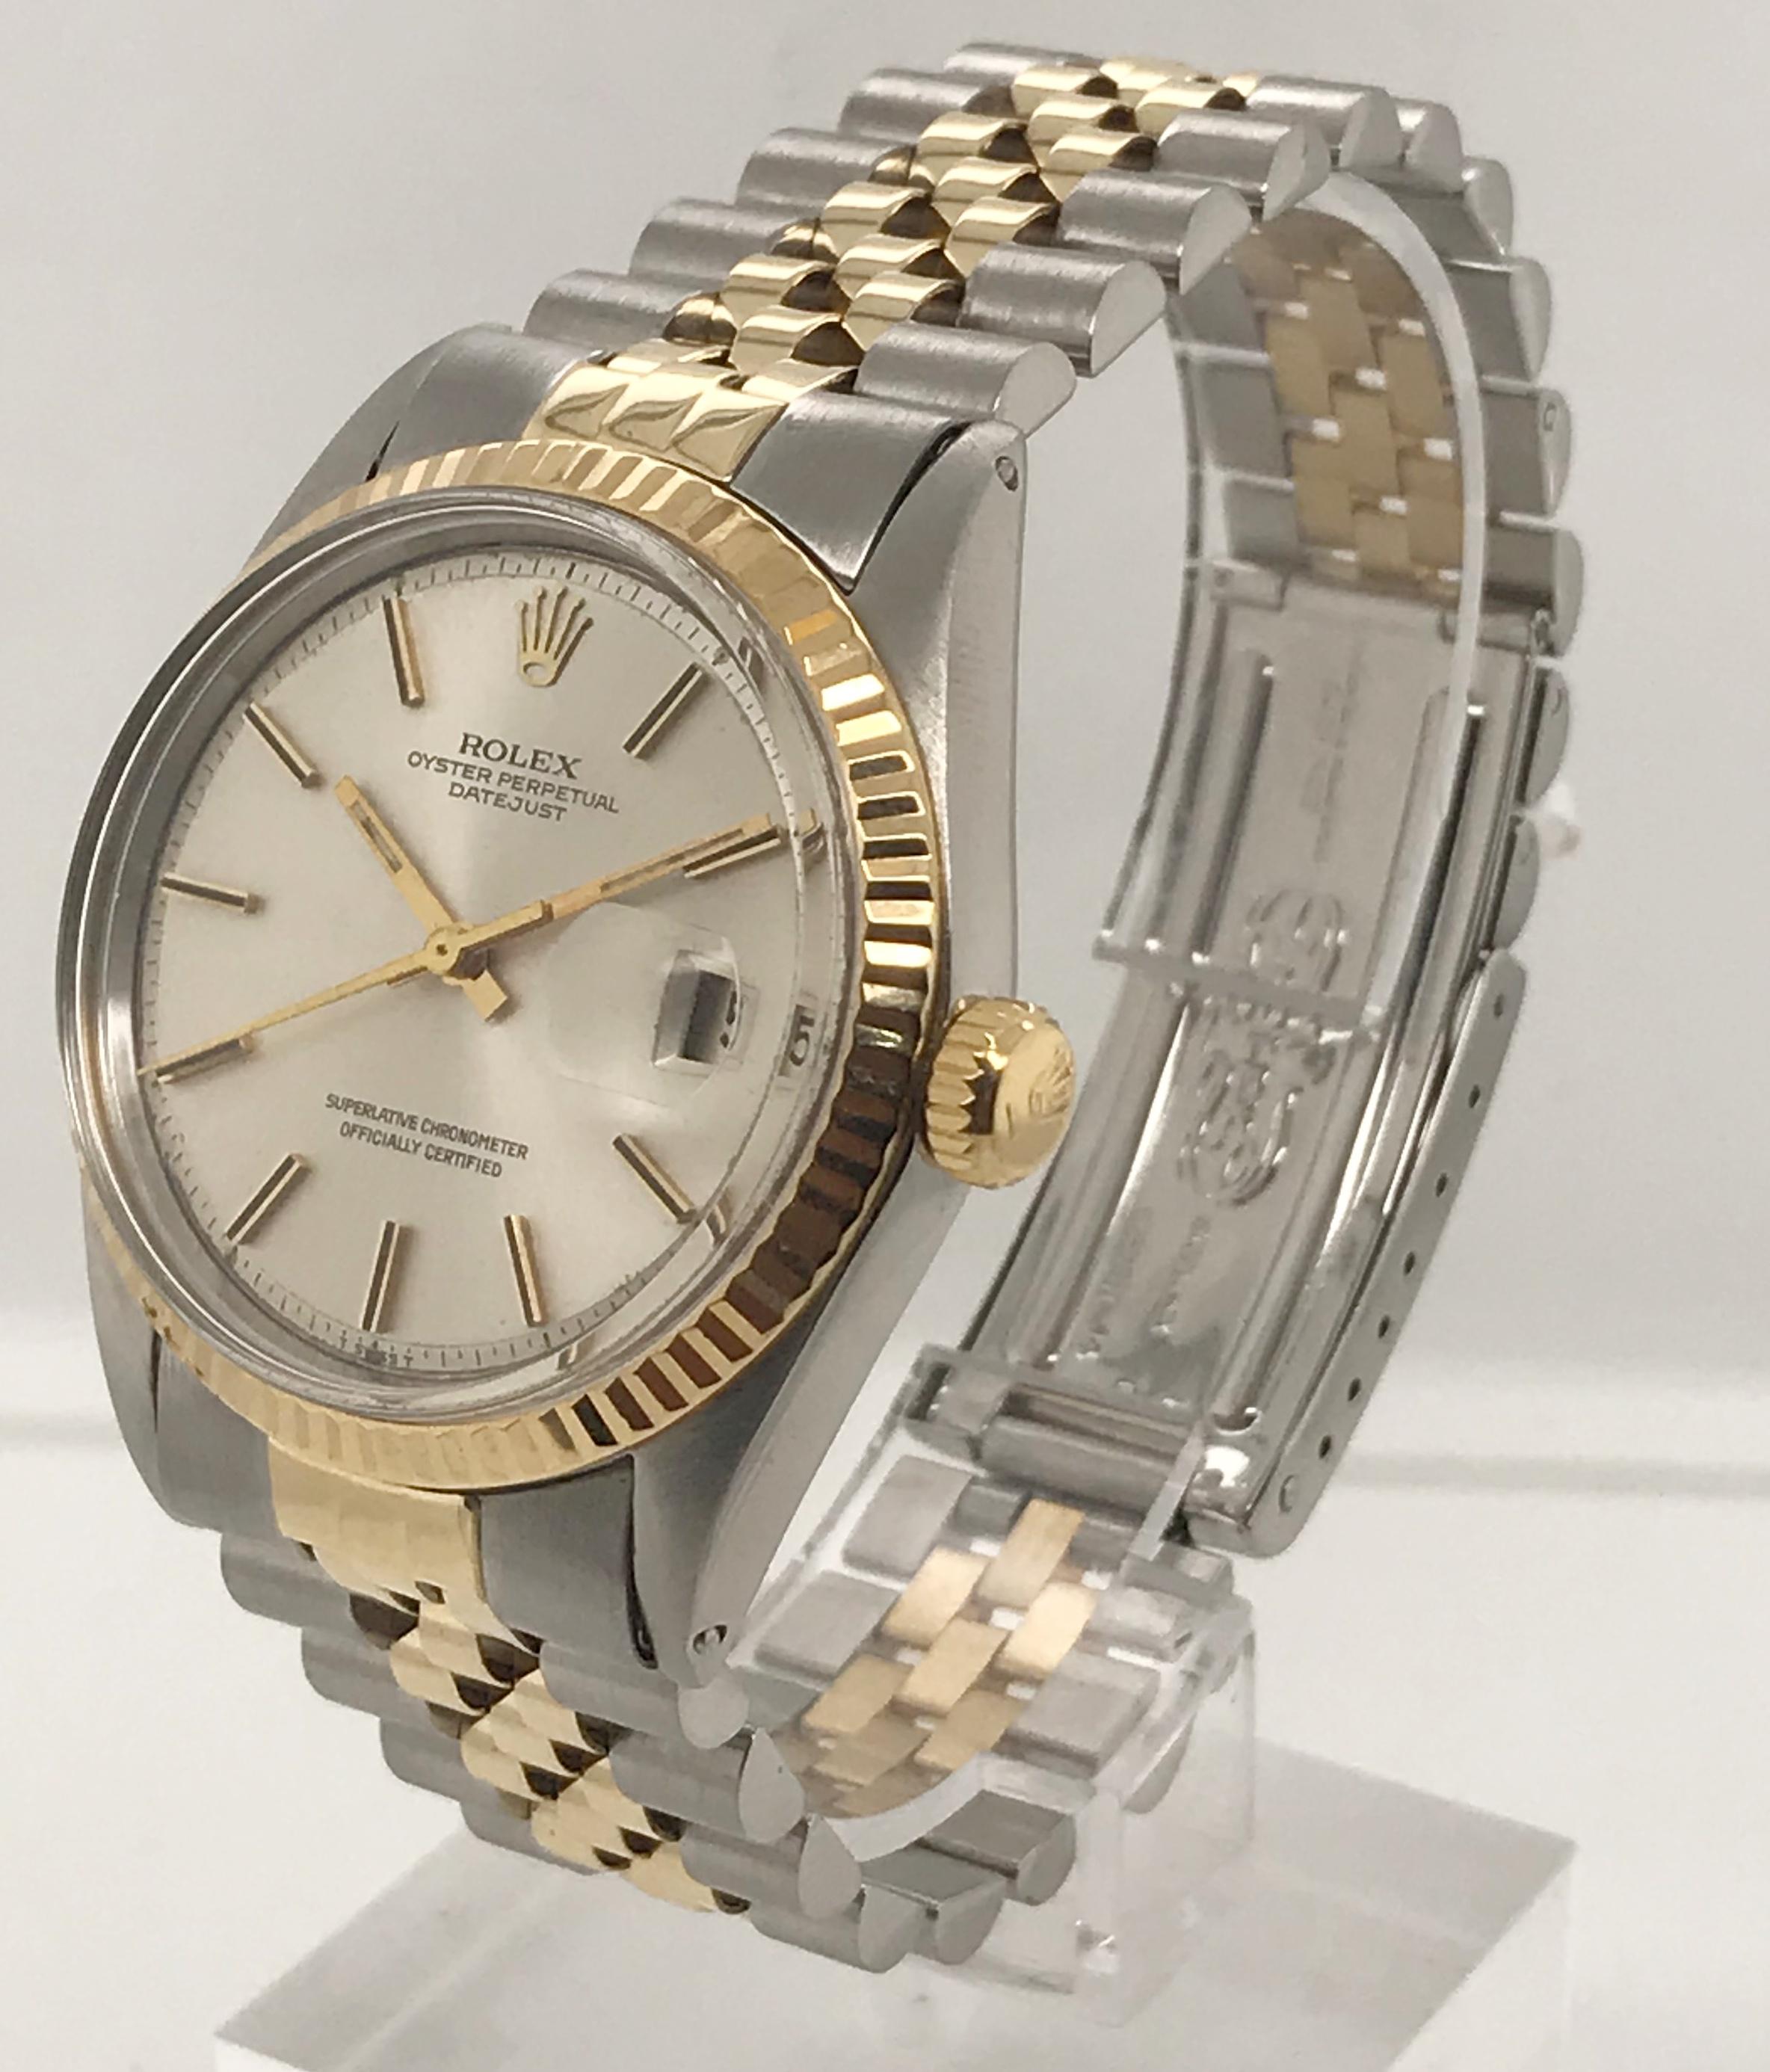 36mm Rolex Datejust with Pie-Pan style Silvered Dial and Fluted Bezel. This timepiece is crafted from 18kt yellow gold and stainless steel. The bracelet is a Rolex Jubilee link. Circa 1970.

Serial Number - 2****** 
Model Number - 1601

This